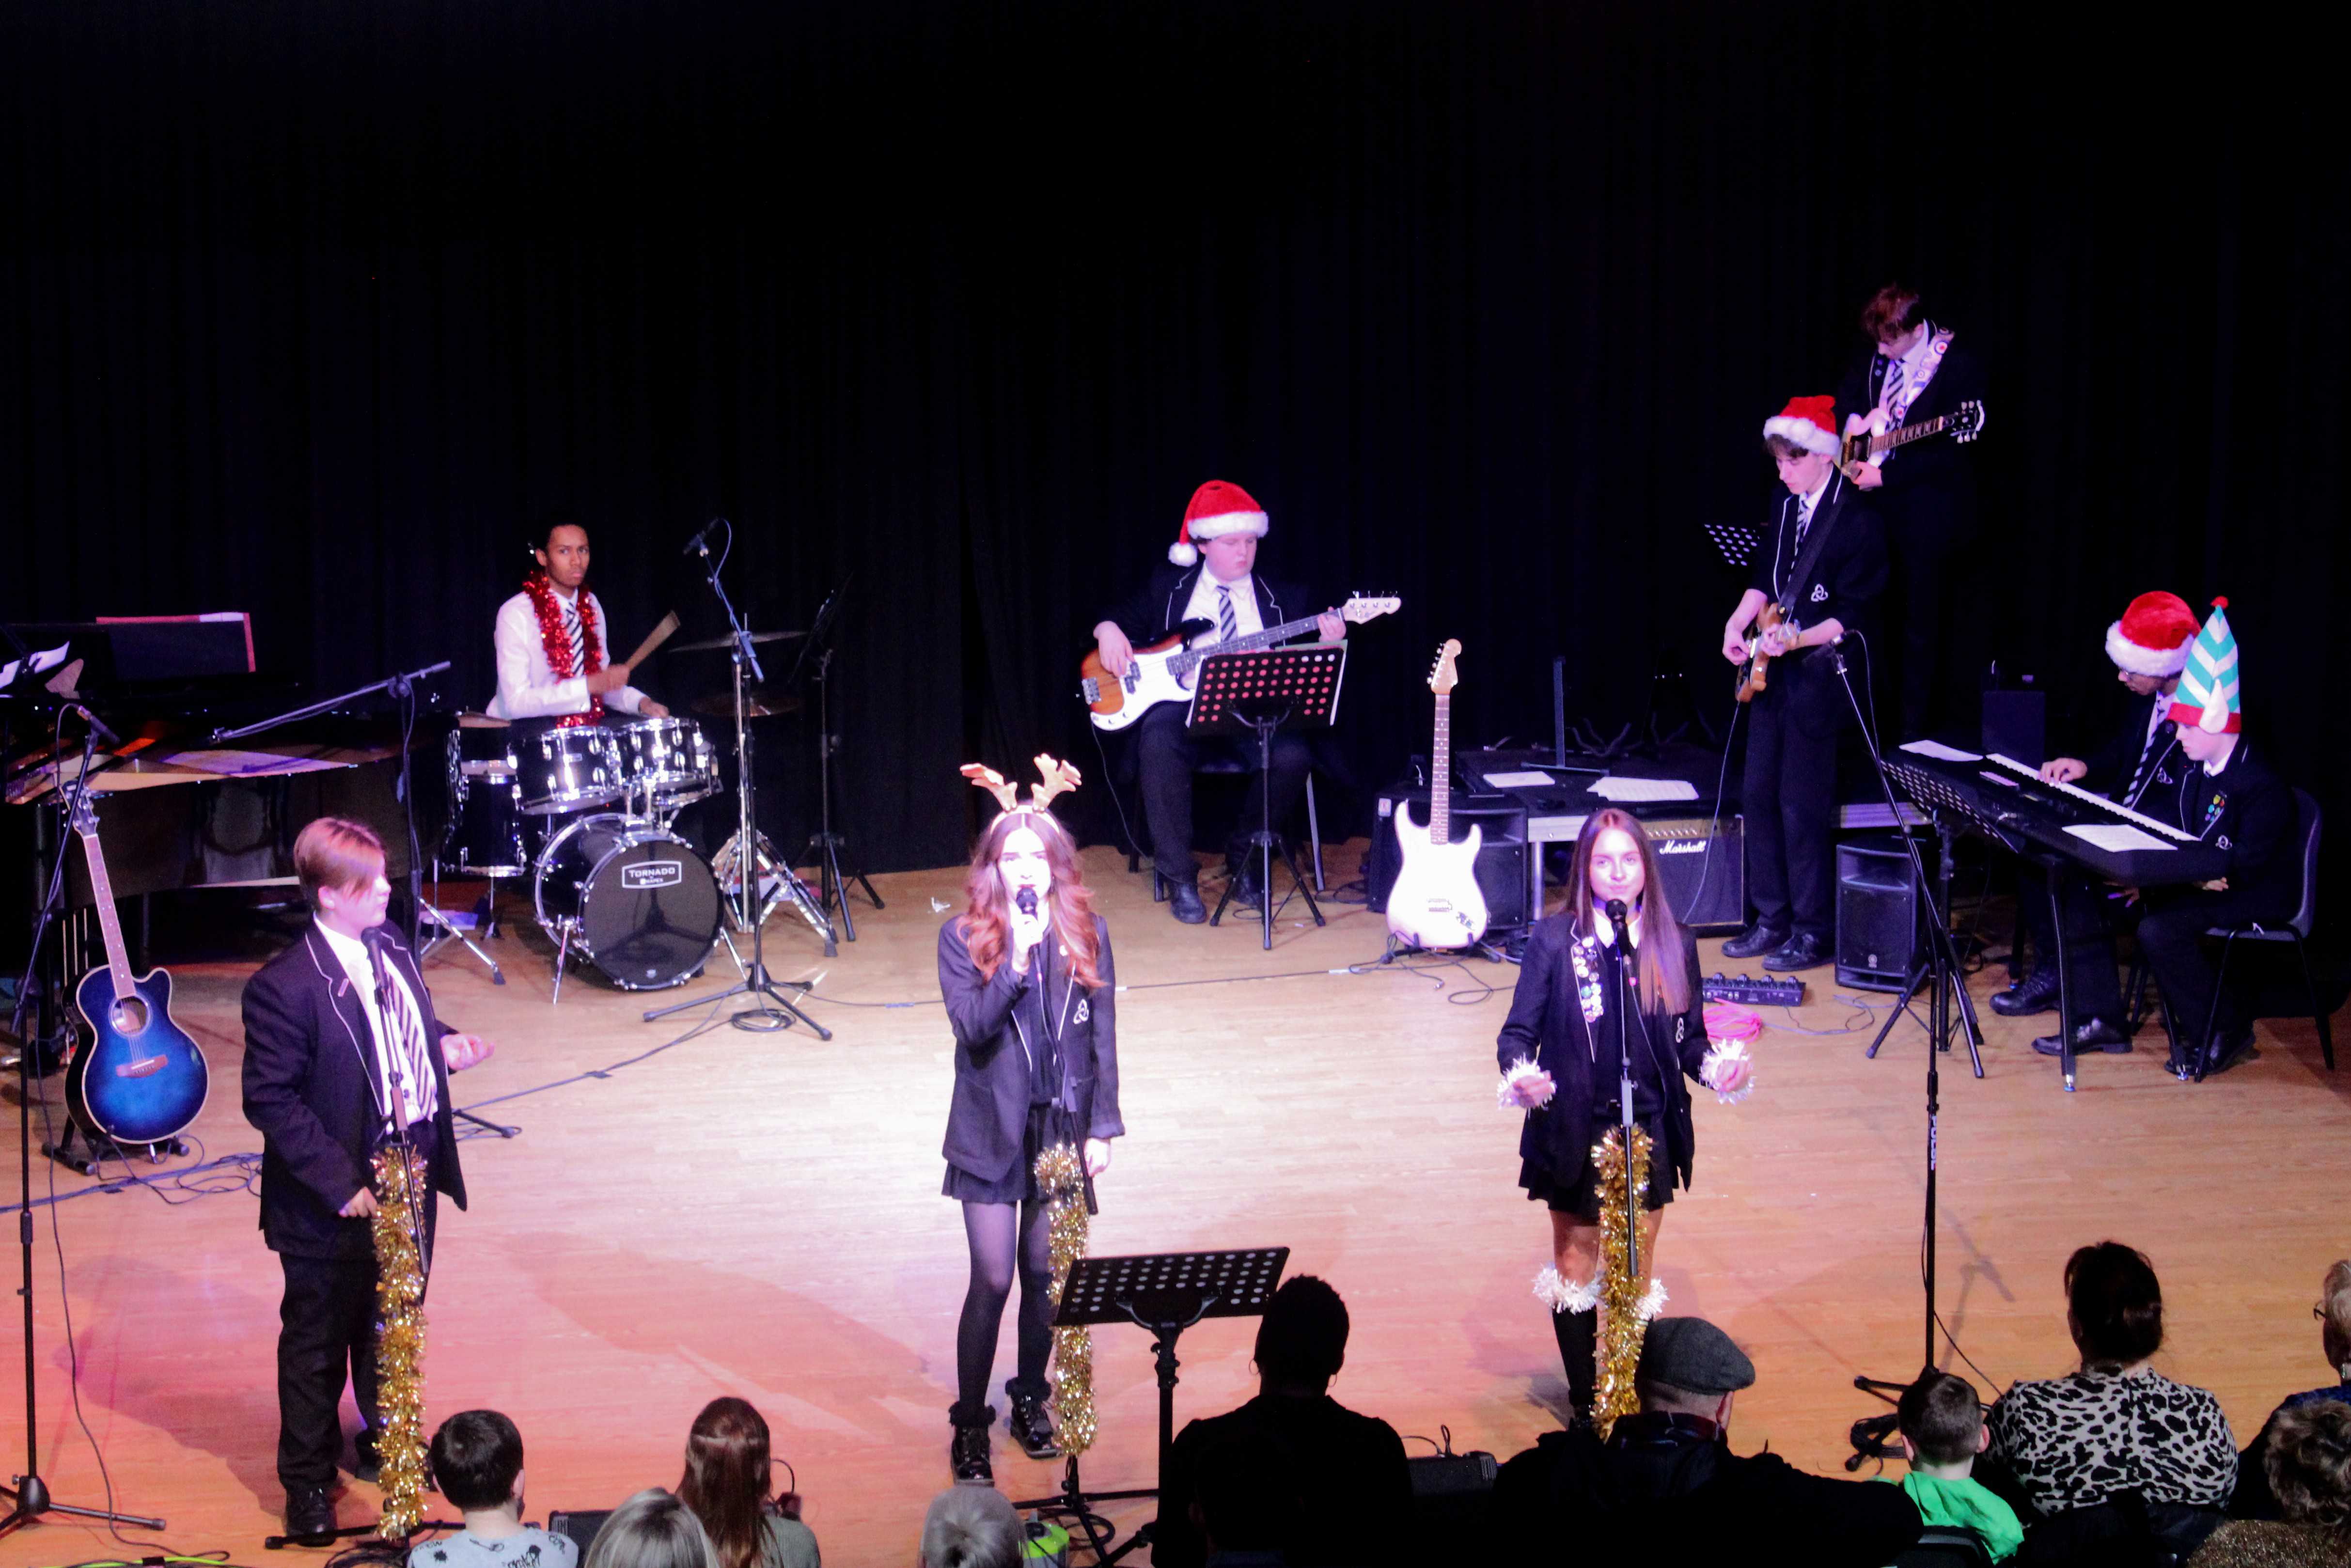 Students perform in a band wearing Christmas hats at Laurus Ryecroft Winter Wonderland 2023